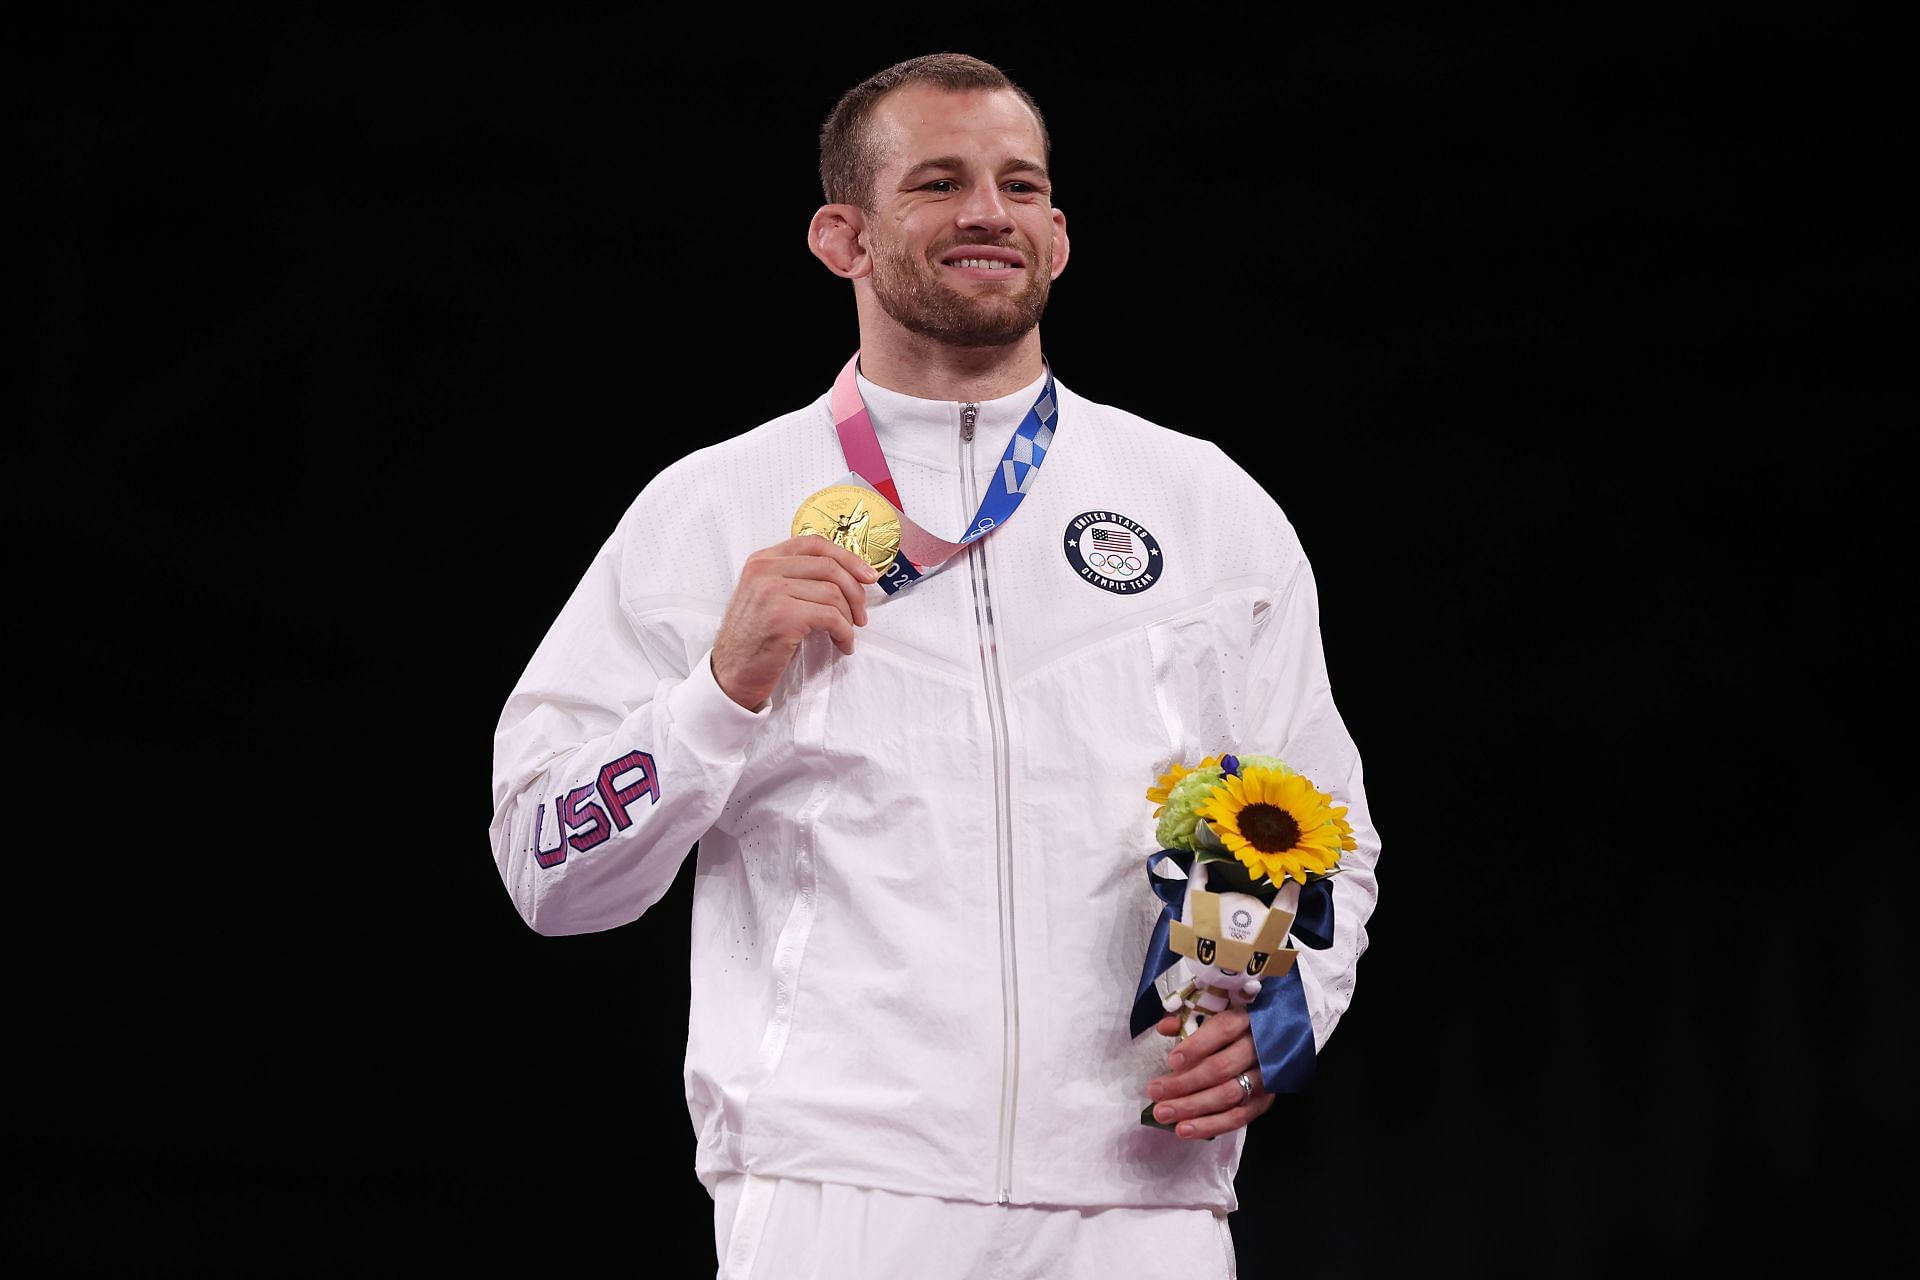 David Taylor poses with his medal during the Victory Ceremony at the Tokyo 2020 Olympic Games. (Photo by Maddie Meyer/Getty Images)